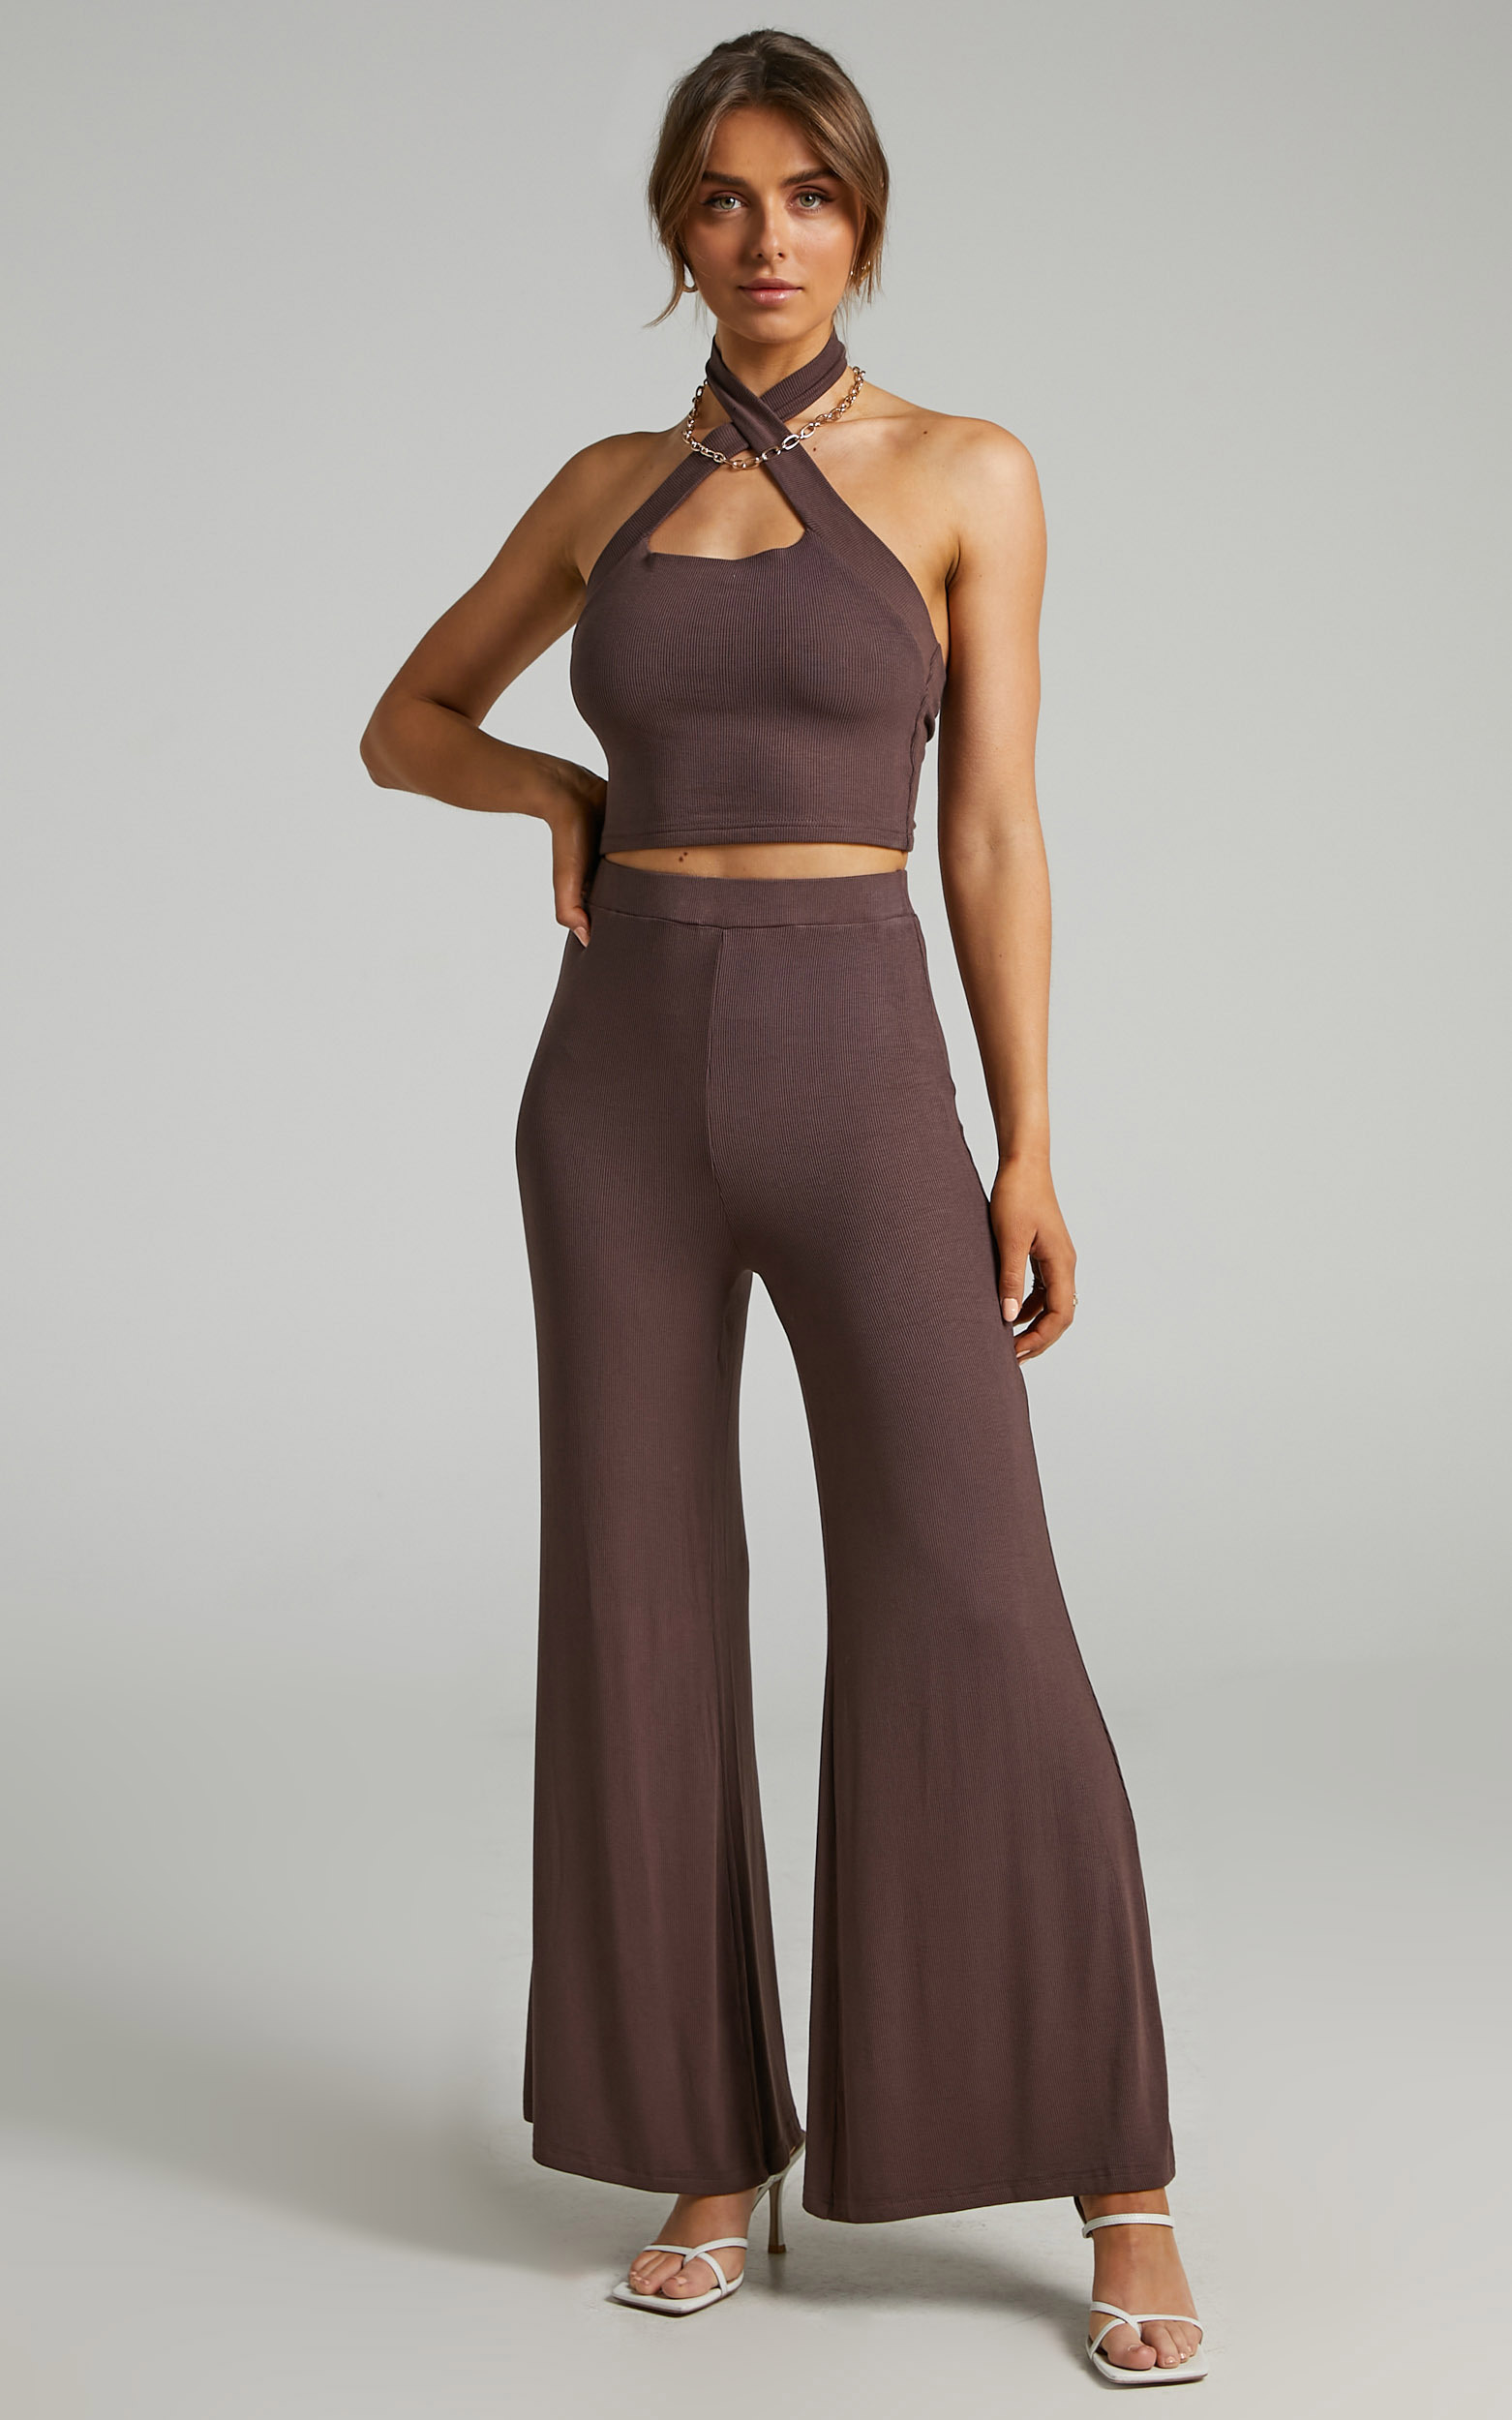 Sierrah Ribbed Two Piece Set in Chocolate - 06, BRN1, hi-res image number null